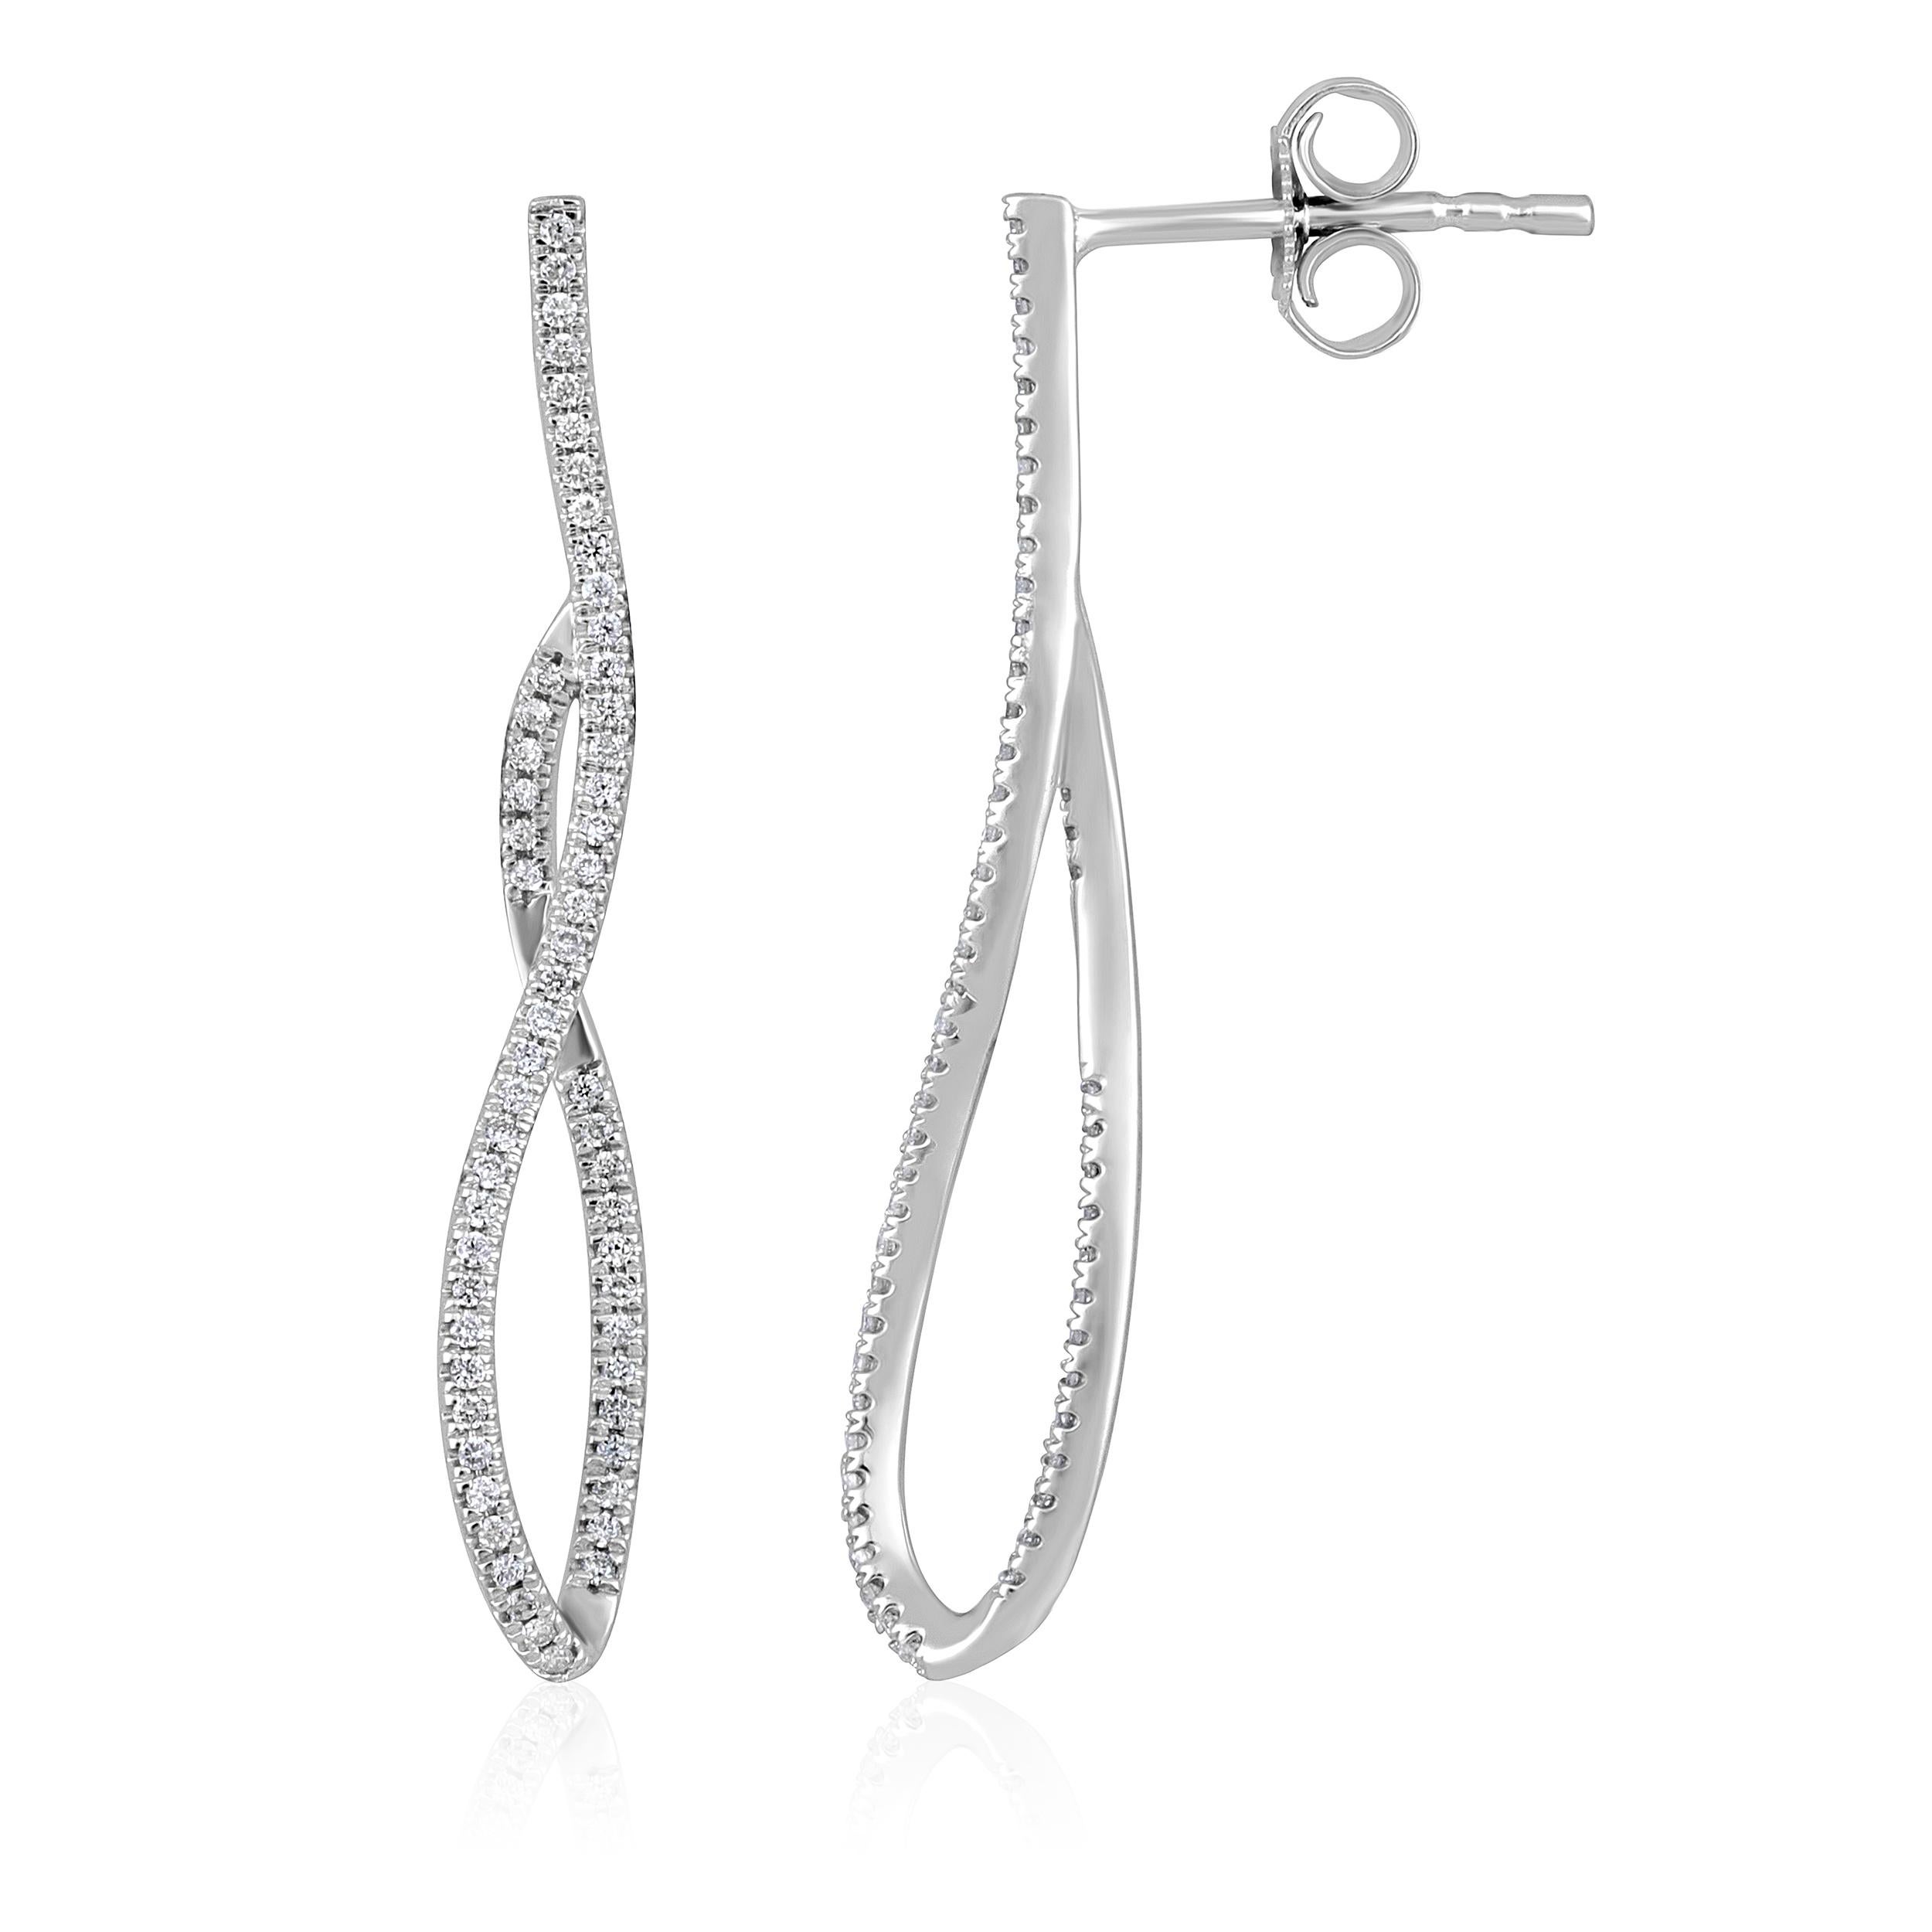 Crafted in 2.08 grams of 14K White Gold, the earrings contain 114 stones of Round Natural Diamonds with a total of 0.19 carat in F-G color and SI clarity.

CONTEMPORARY AND TIMELESS ESSENCE: Crafted in 14-karat/18-karat with 100% natural diamond and